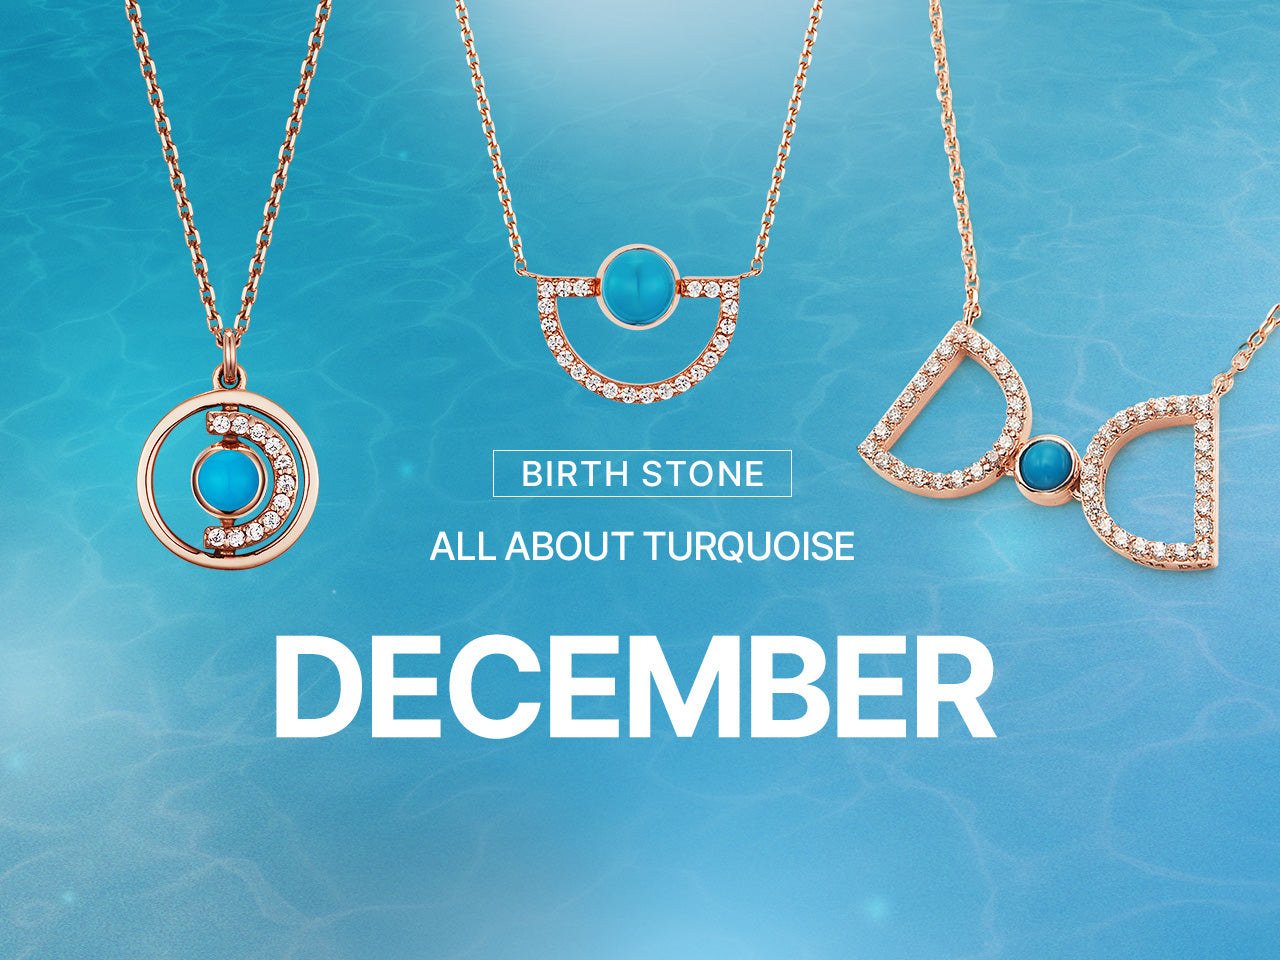 December Birthstone: All About Turquoise